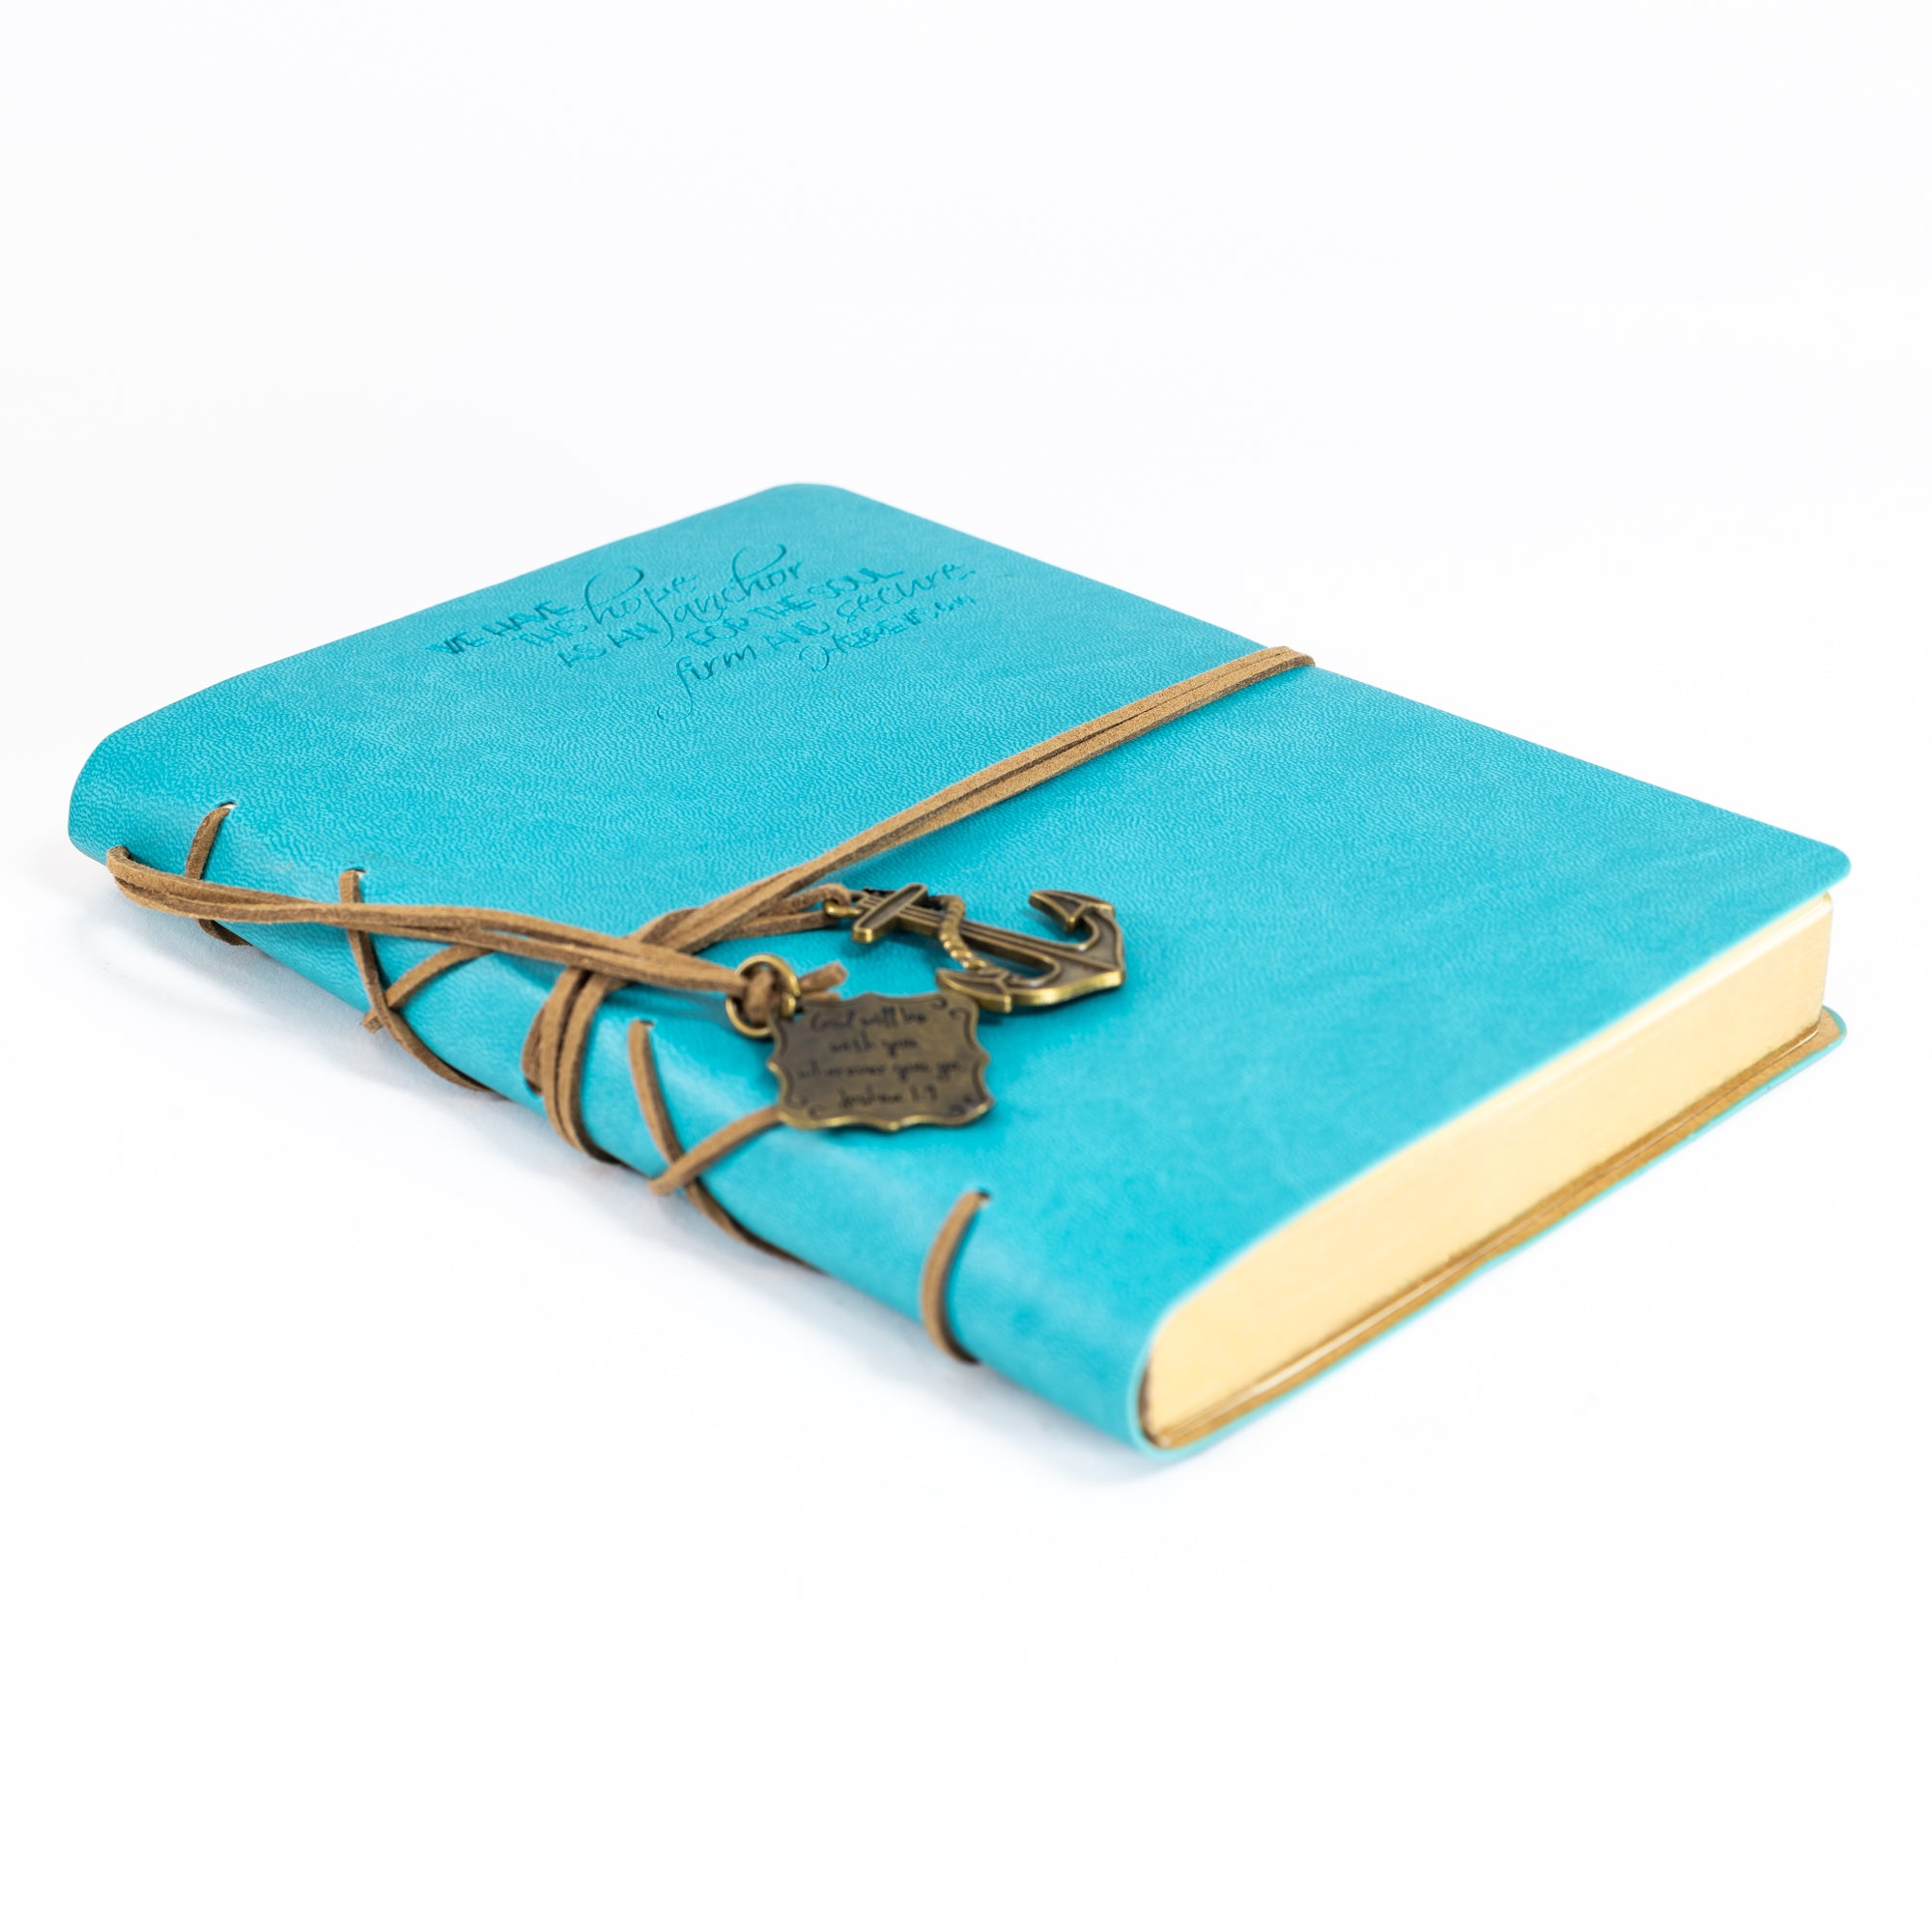 Faux Leather Journal : Hope As An Anchor With Anchor Charm Aqua